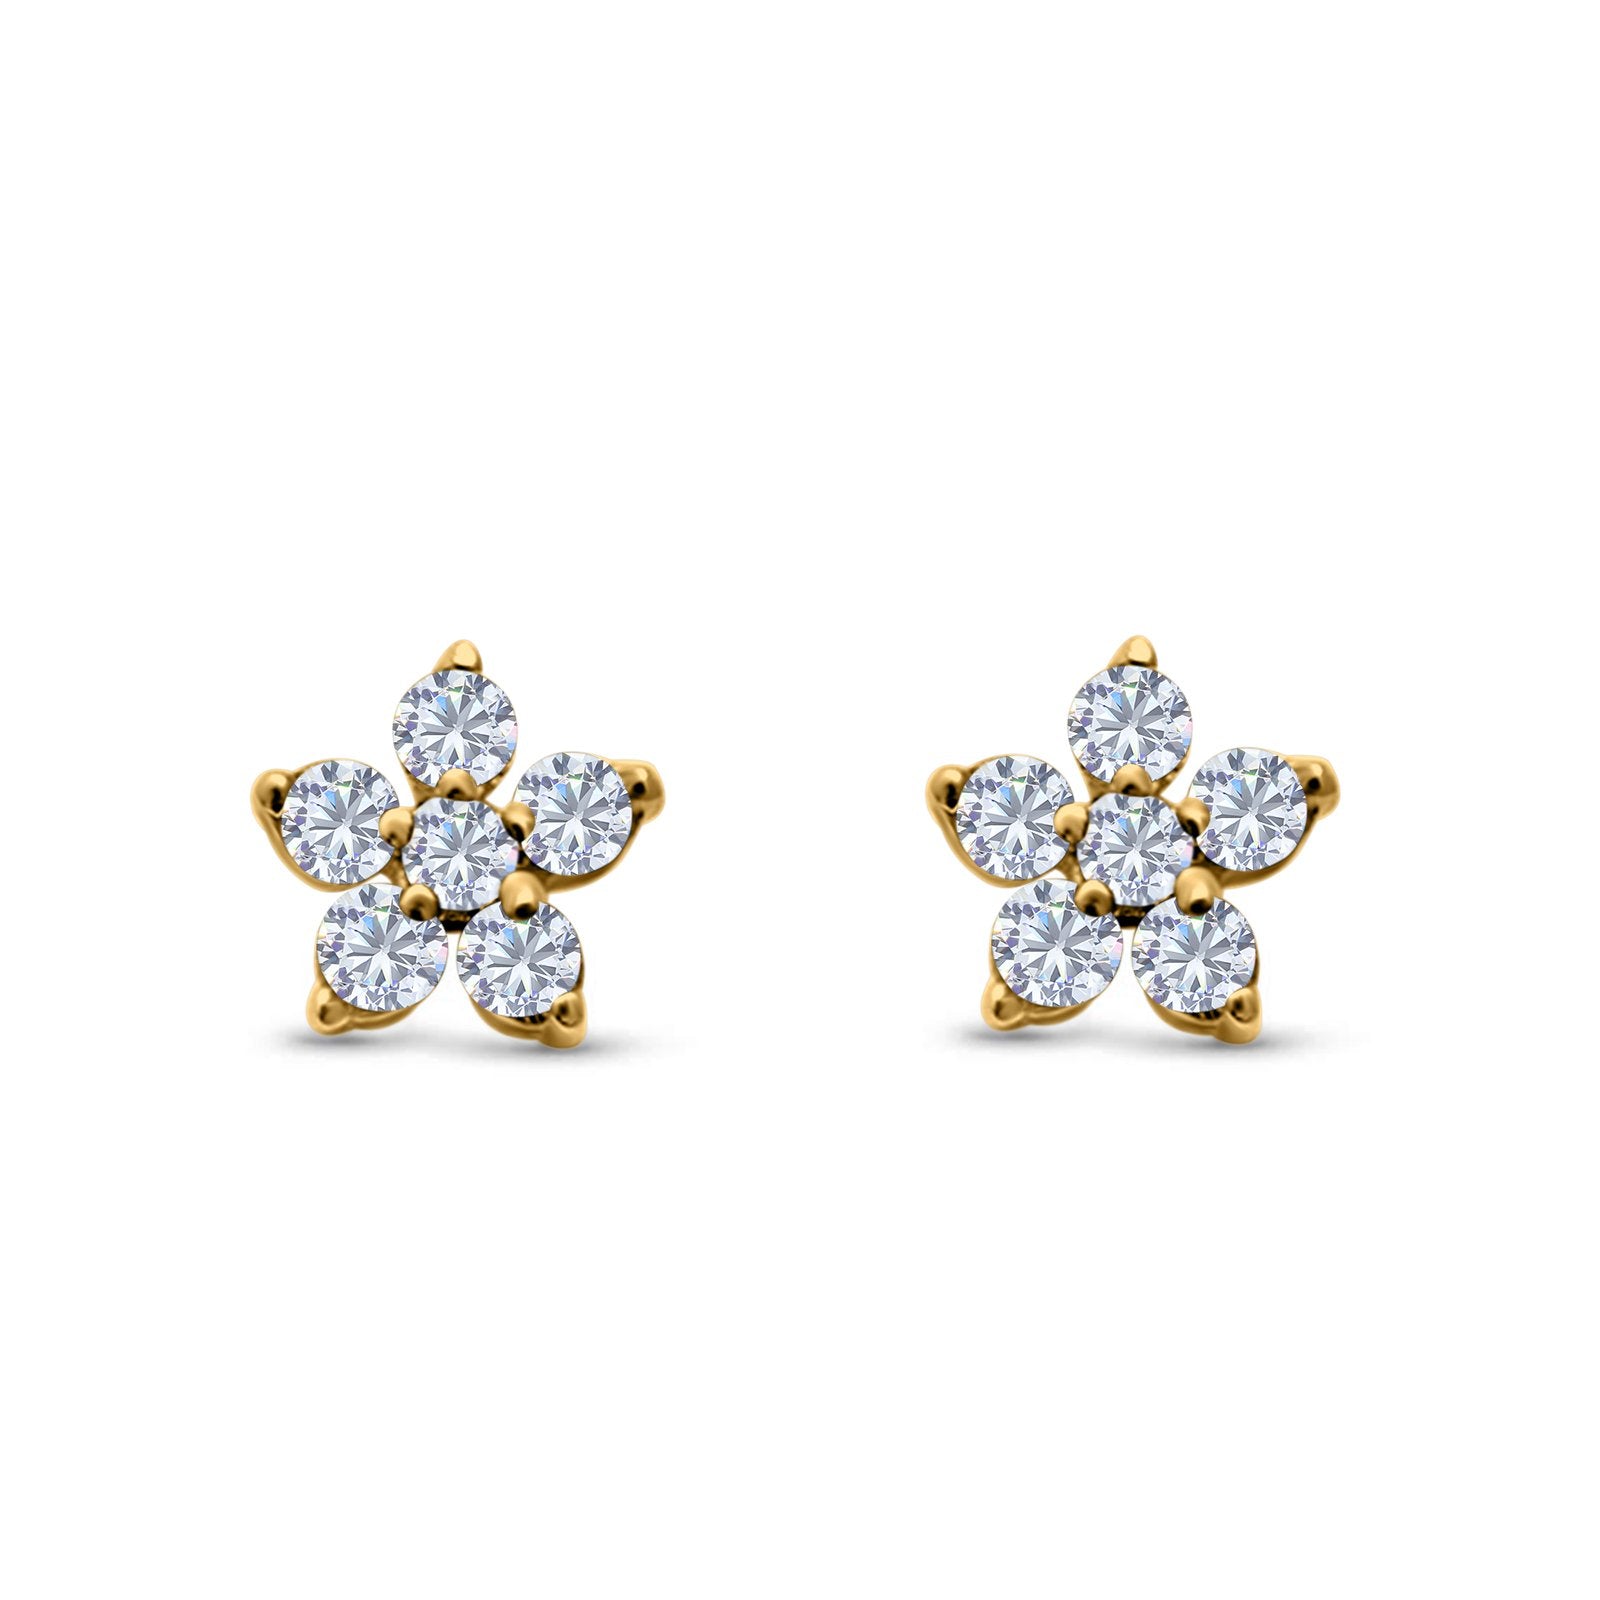 Cluster Flower Stud Earrings Round Yellow Tone, Simulated CZ 925 Sterling Silver